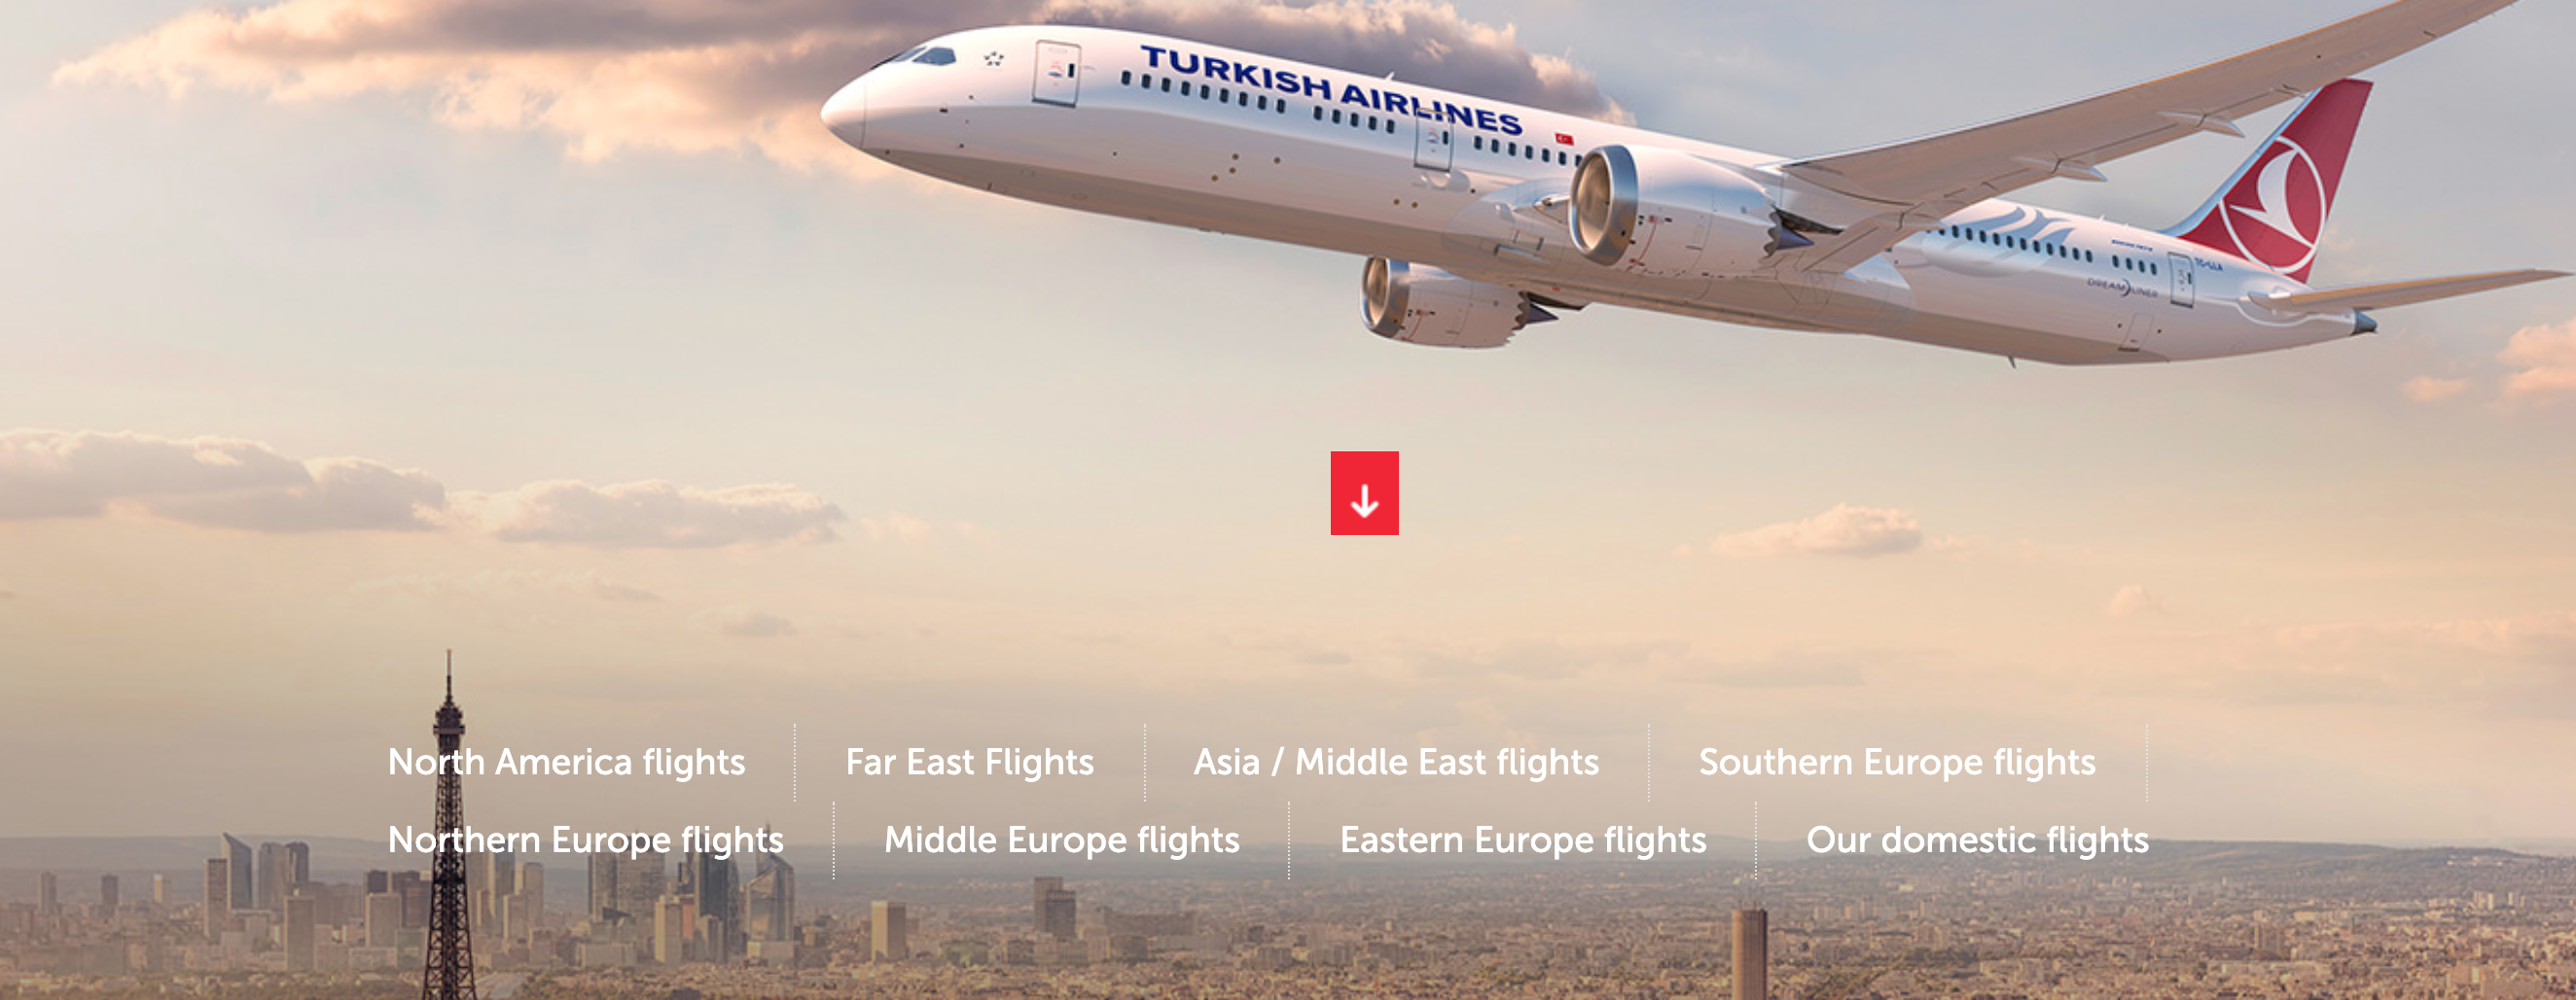 Where does Turkish Airlines fly; Turkish Airlines routes; Turkish Airlines route map, List of Turkish Airlines destinations; Turkish Airlines flights; Turkish Airlines schedule; Turkish Airlines domestic flights; Turkish Airlines international flights; Turkish Airlines world routes